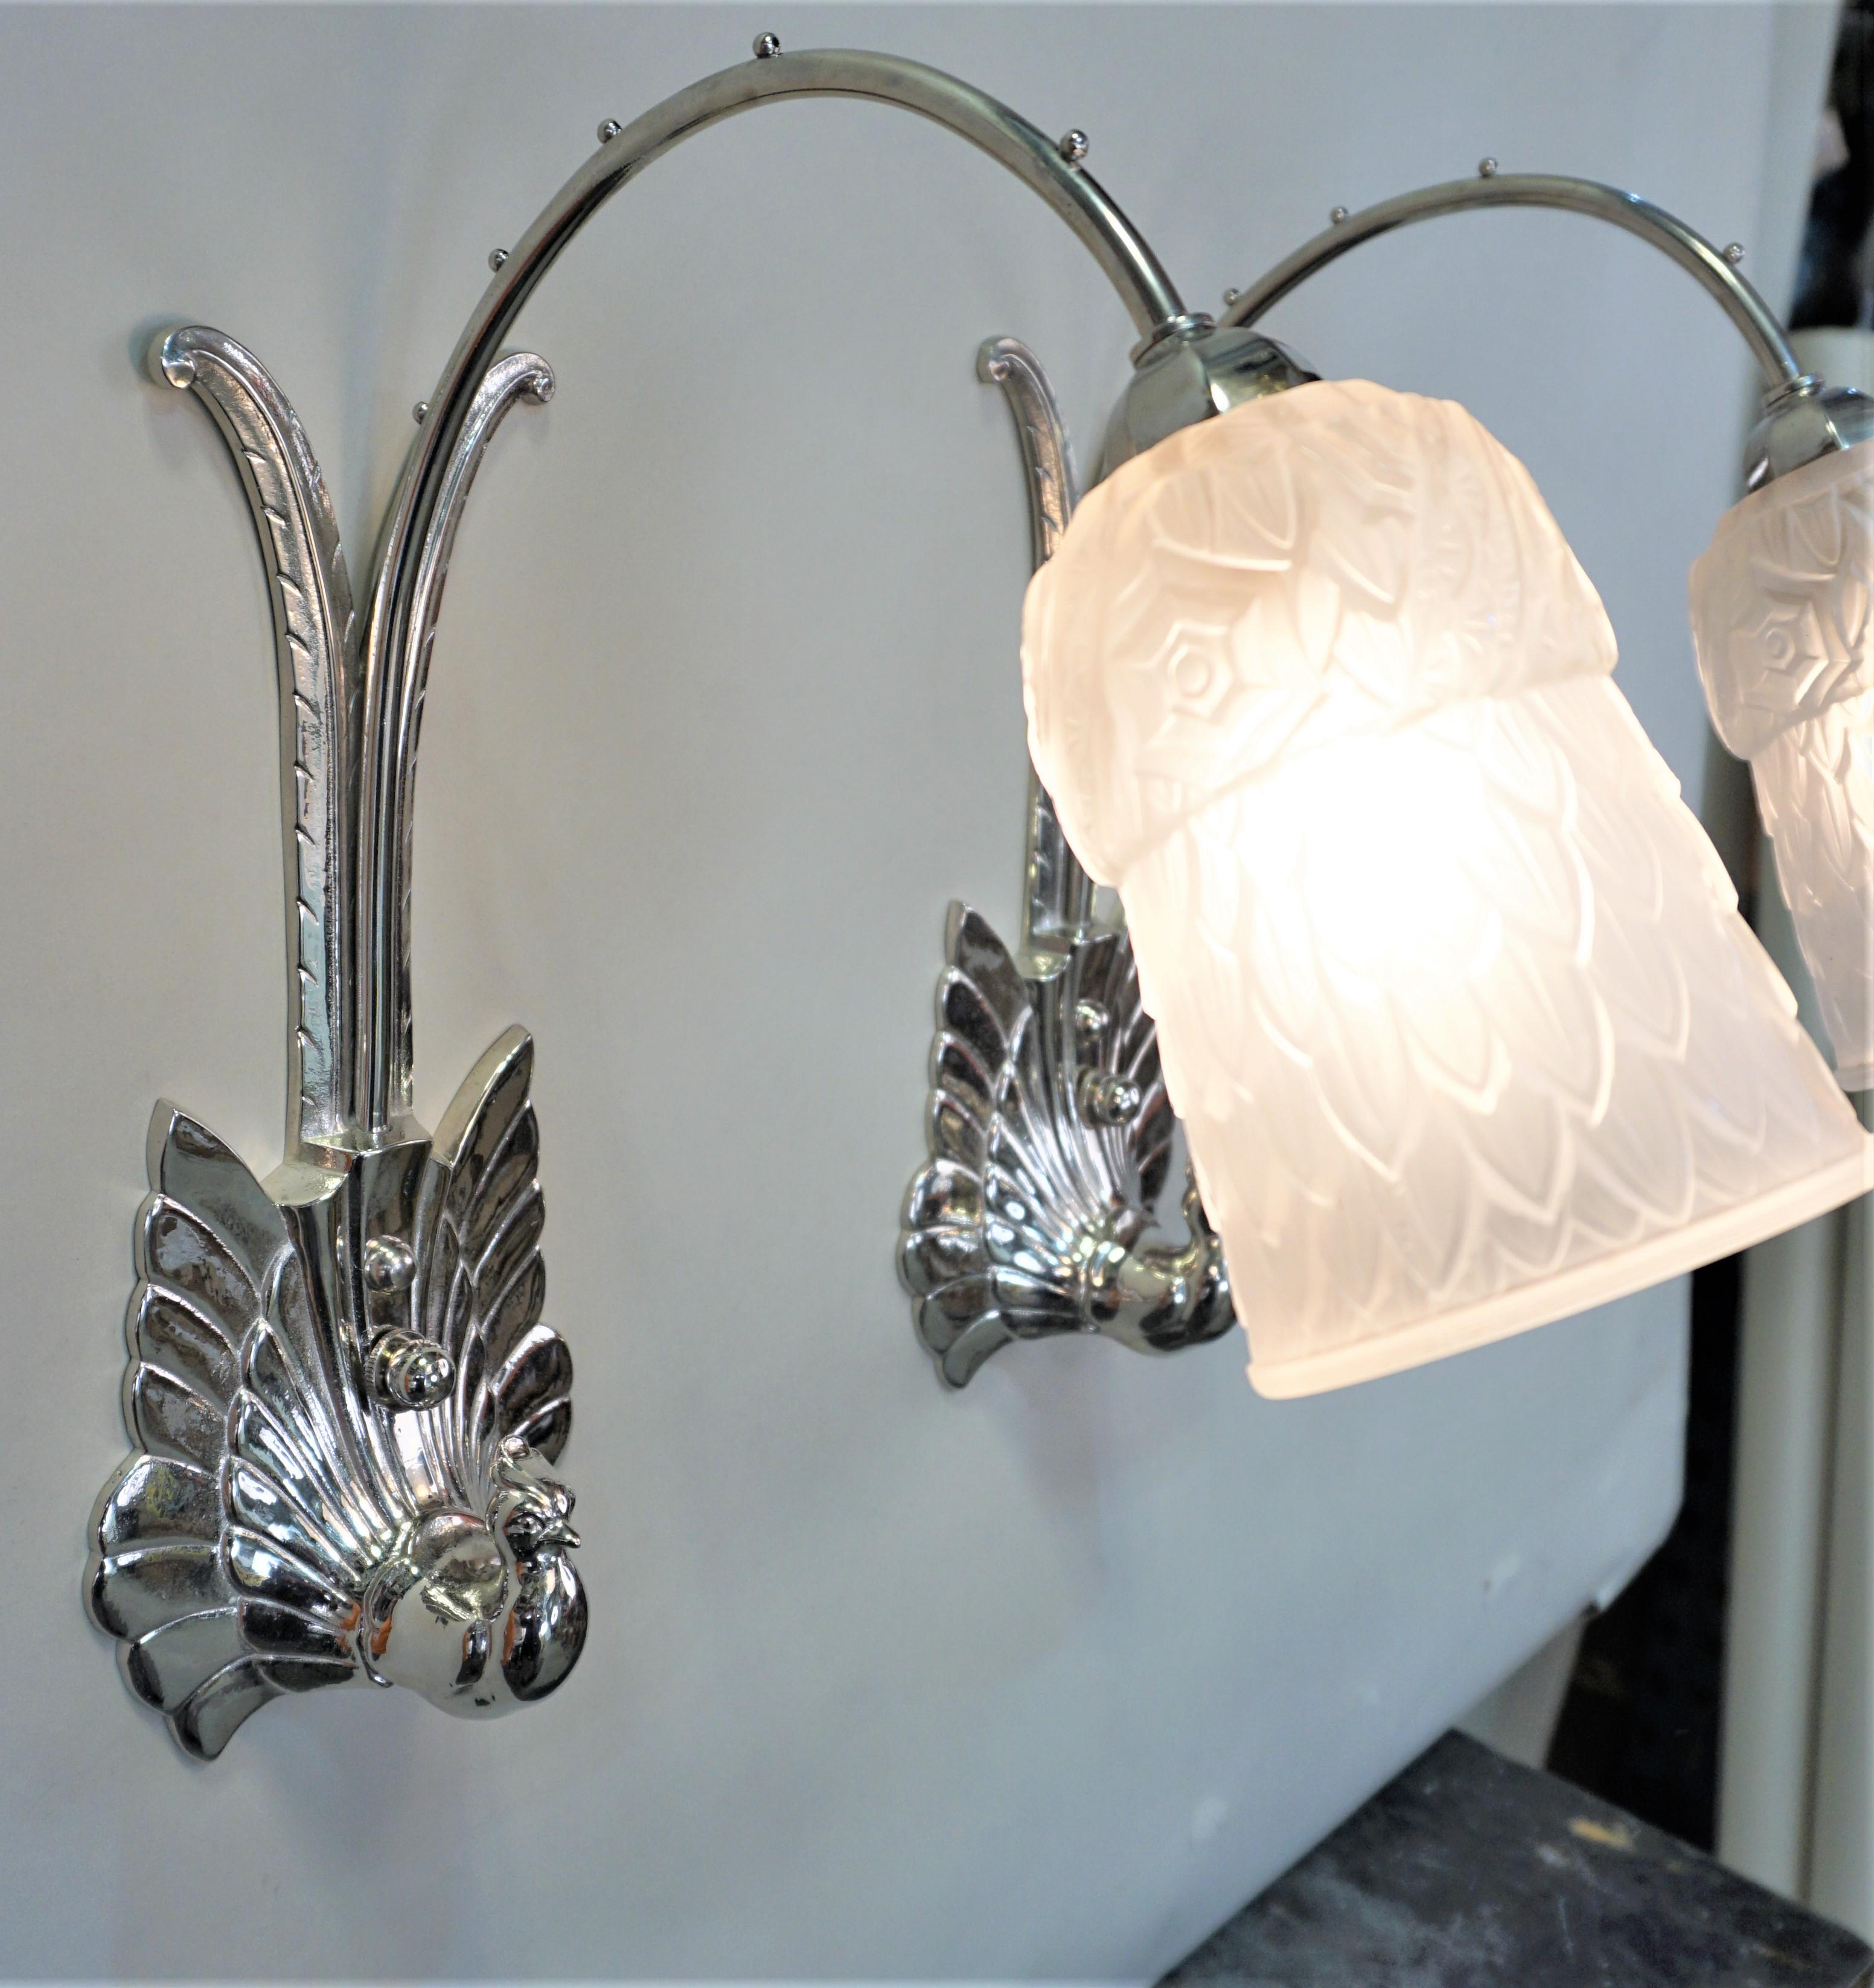 Elegant pair of 1930 French Art Deco wall sconces in nickel on bronze bird holding clear frost glass shades.